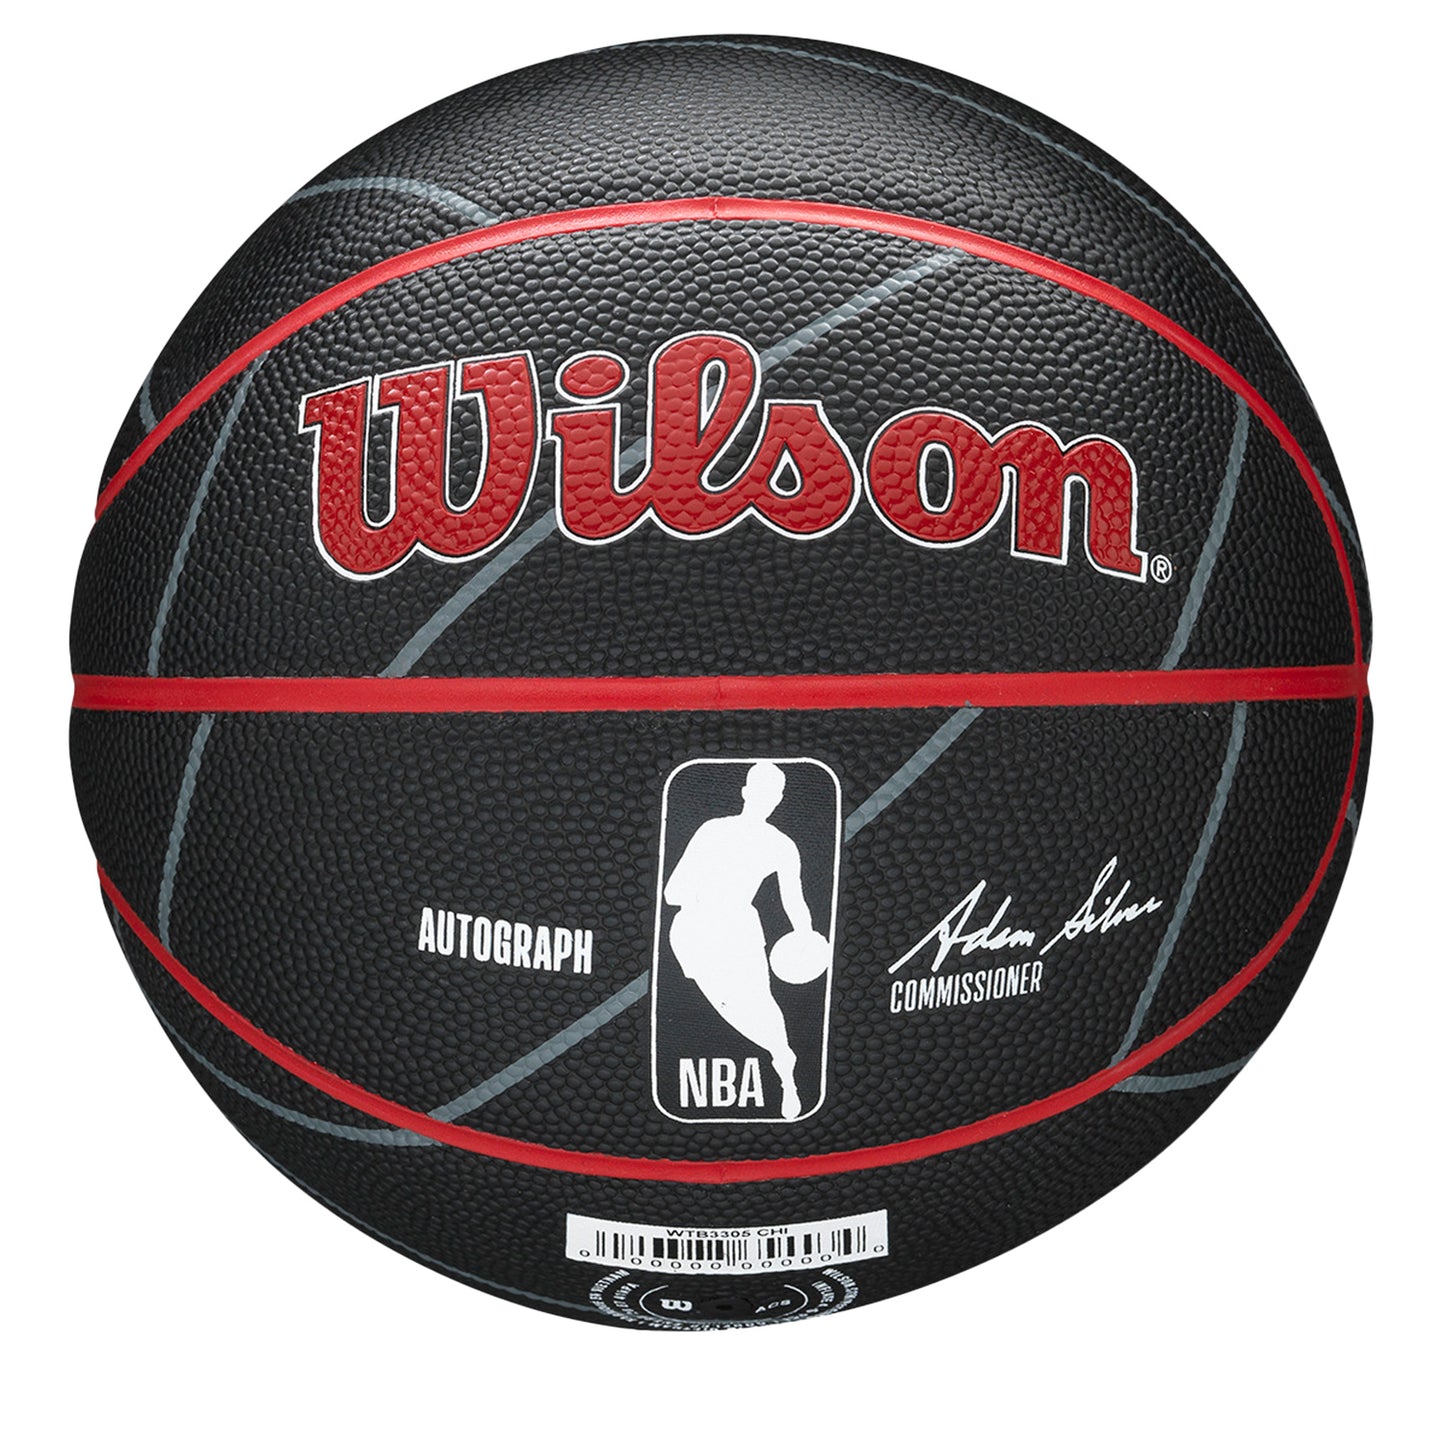 Chicago Bulls Team Autograph Mini Basketball - black side - front view